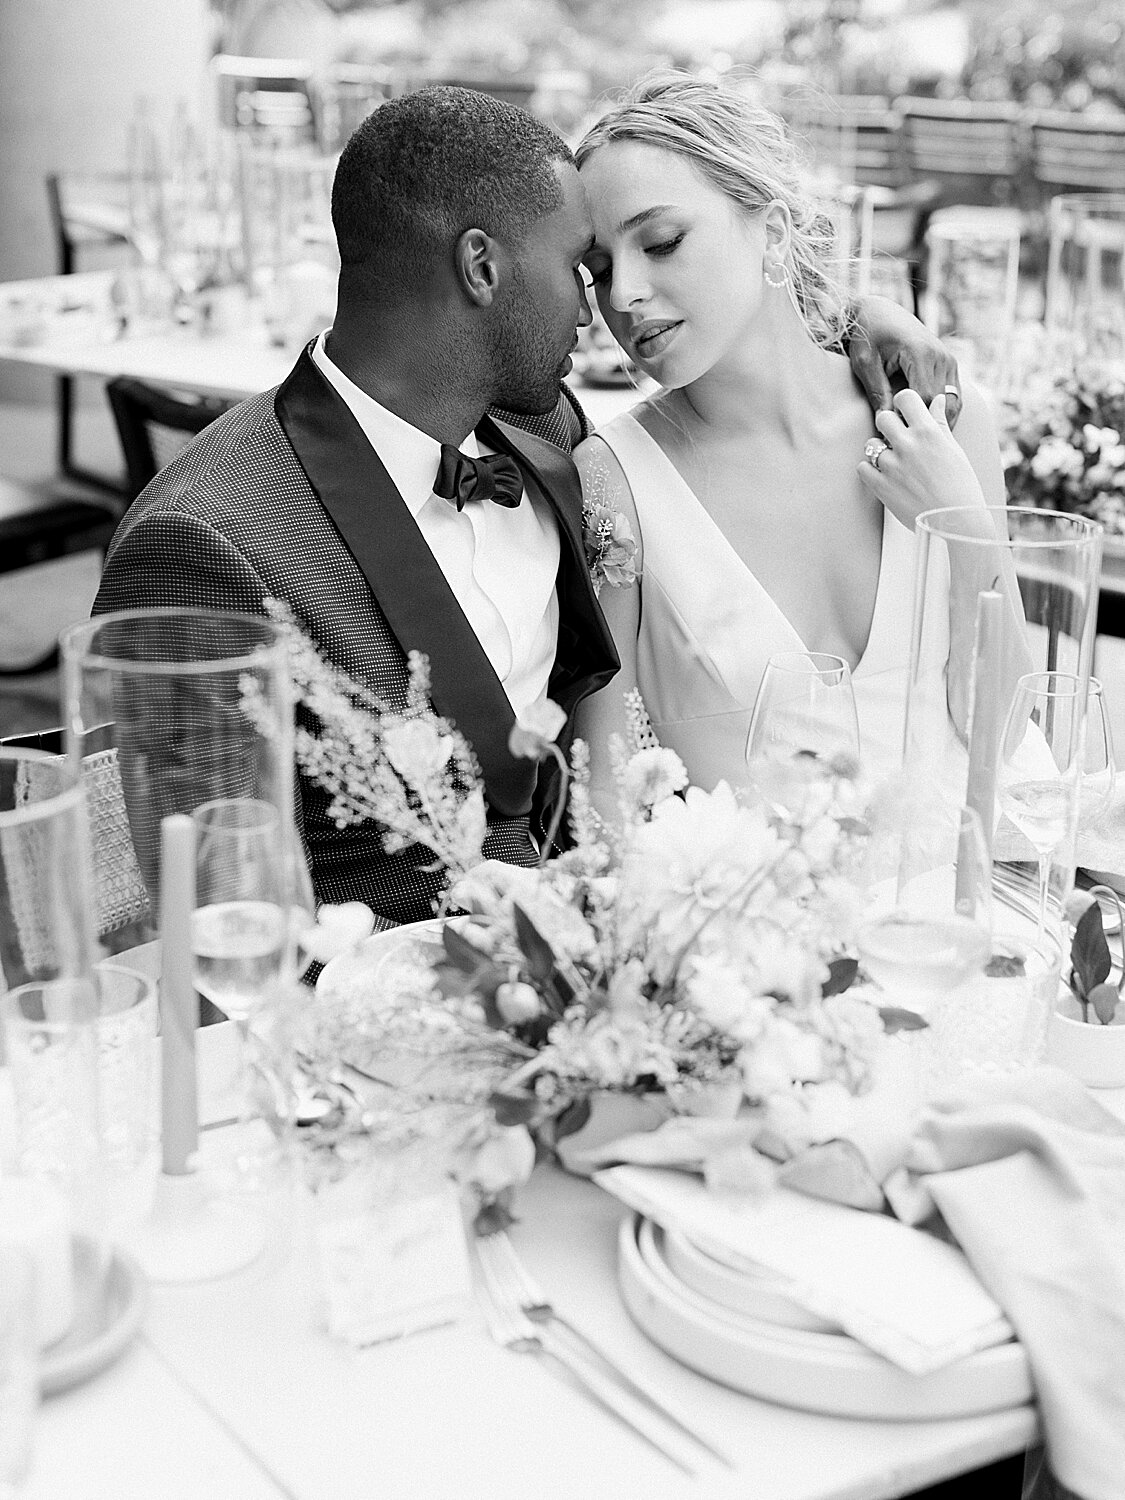 black and white portrait of bride and groom toasting | Asher Gardner Photography | Intimate Ceremony in DUMBO New York